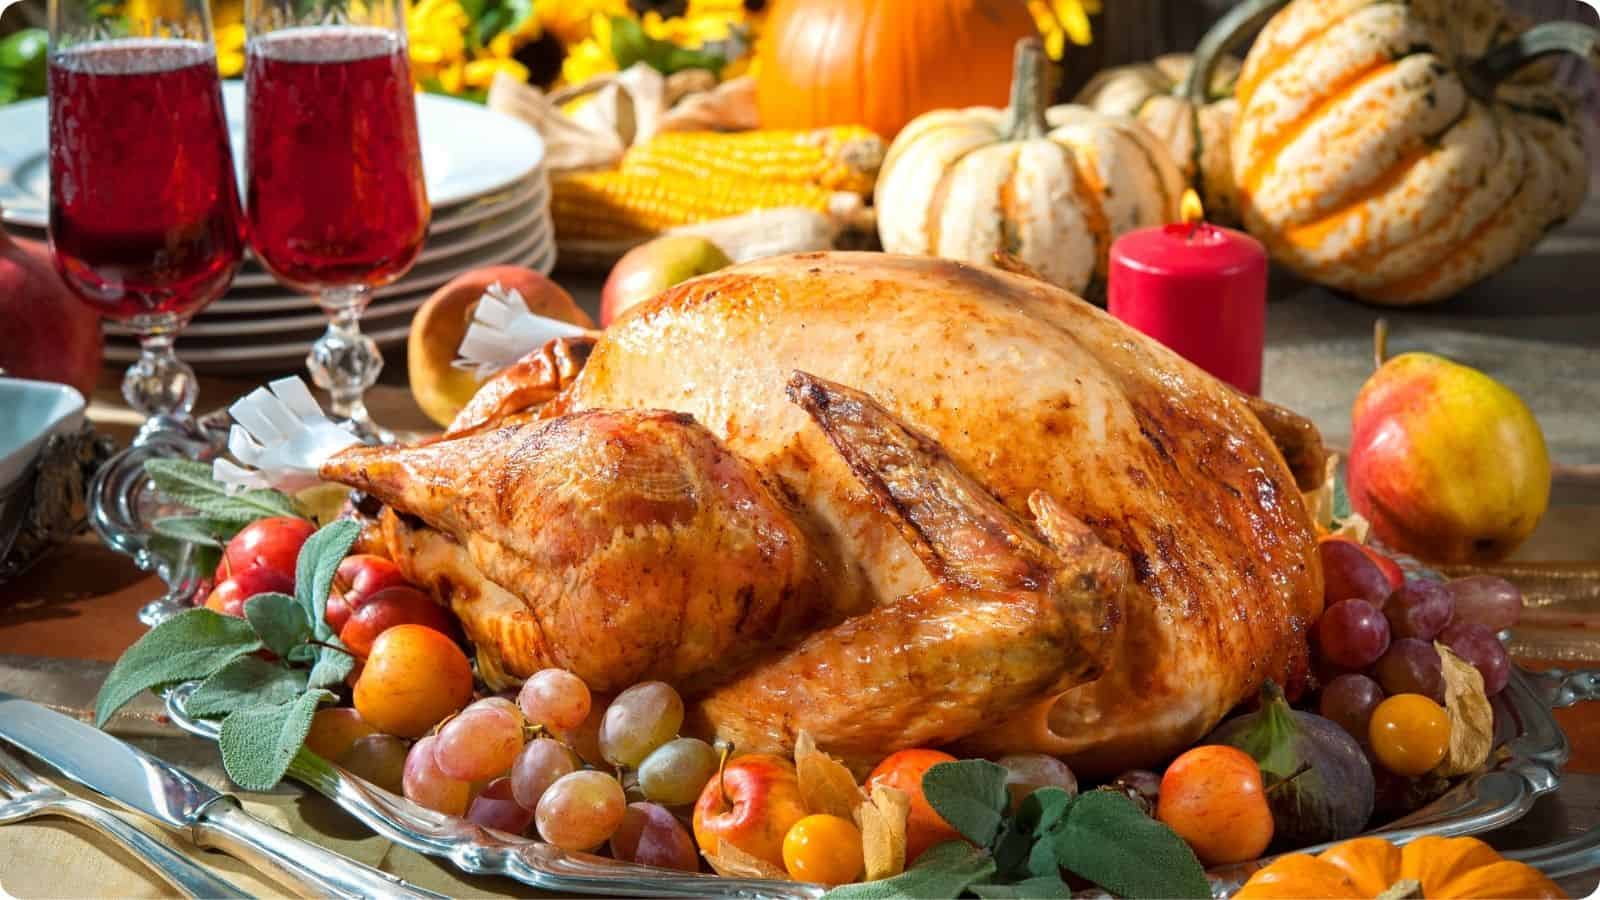 Thanksgiving Turkey served as the centerpiece embellished with fruits.